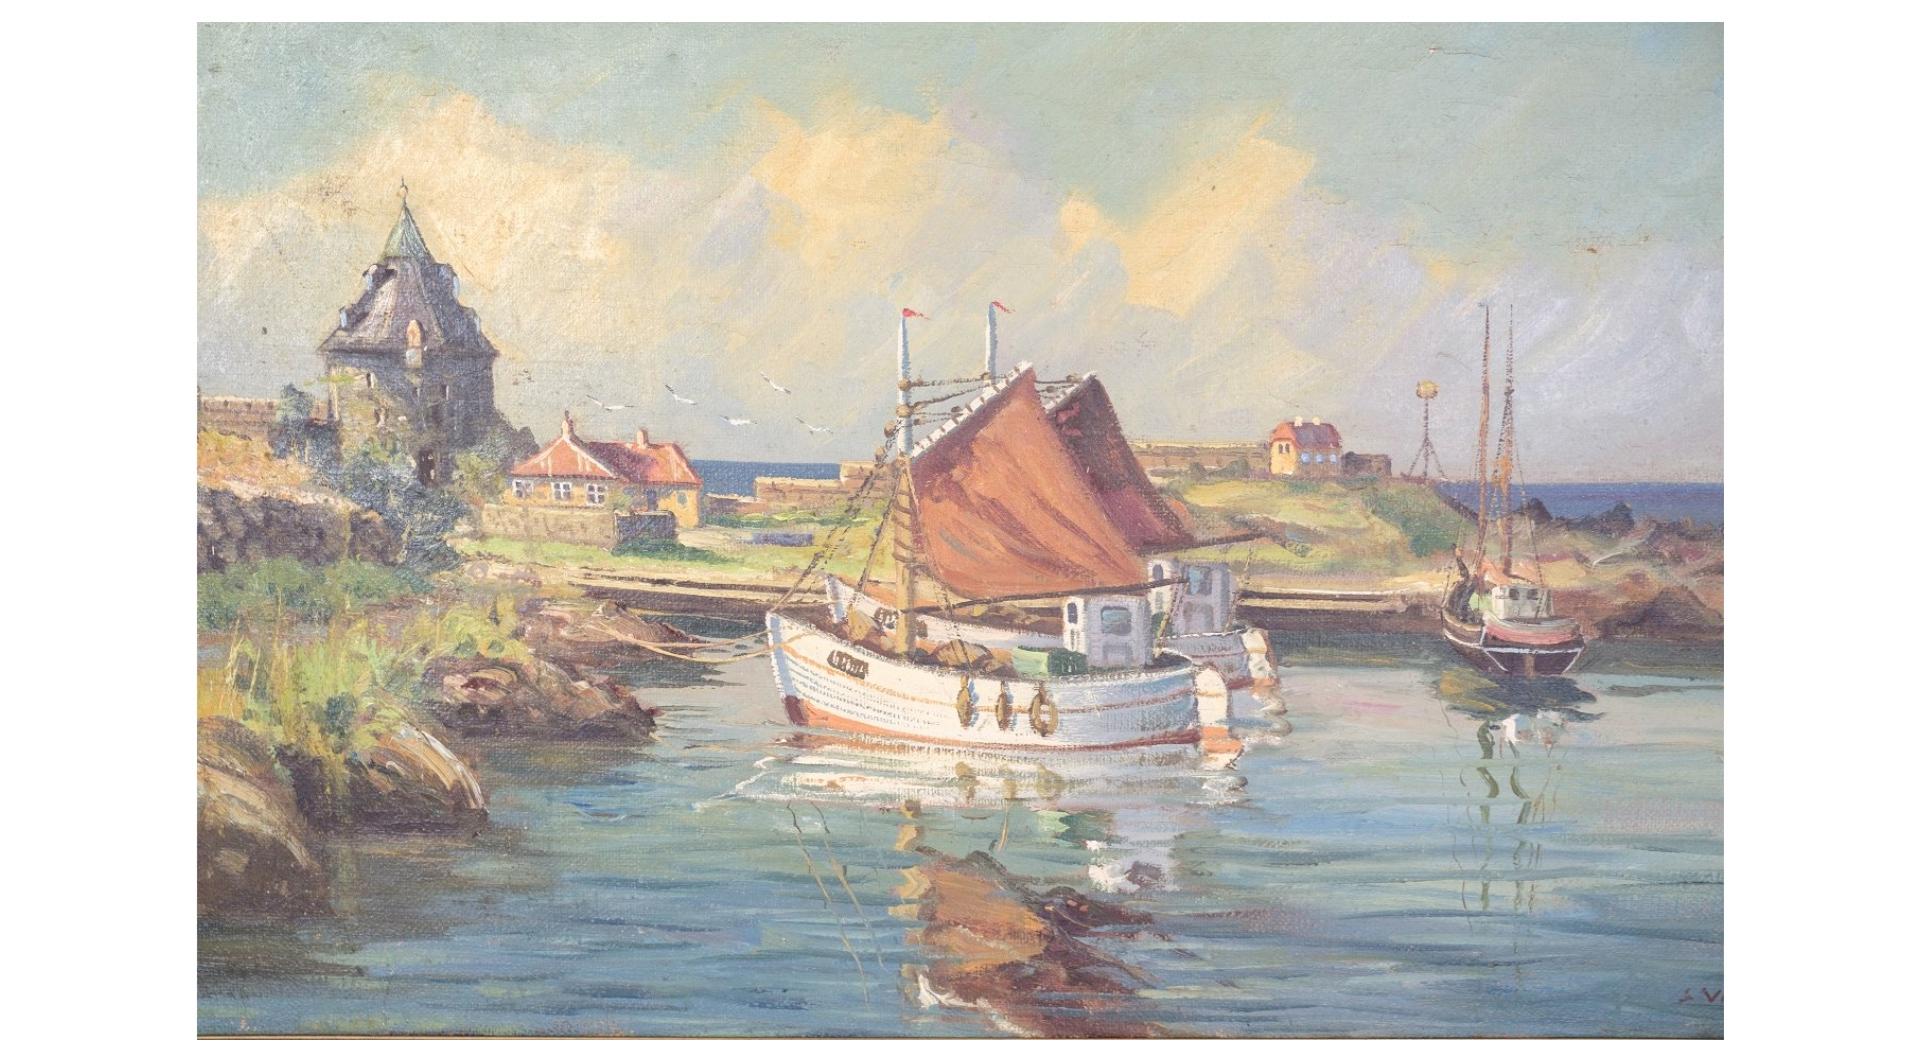 The large oil painting on canvas of fishing boats near the coast from around the 1930s is a wonderful work of art that captures the essence of seaside life in an era of true beauty and simplicity.

The painting shows an idyllic scene where fishing